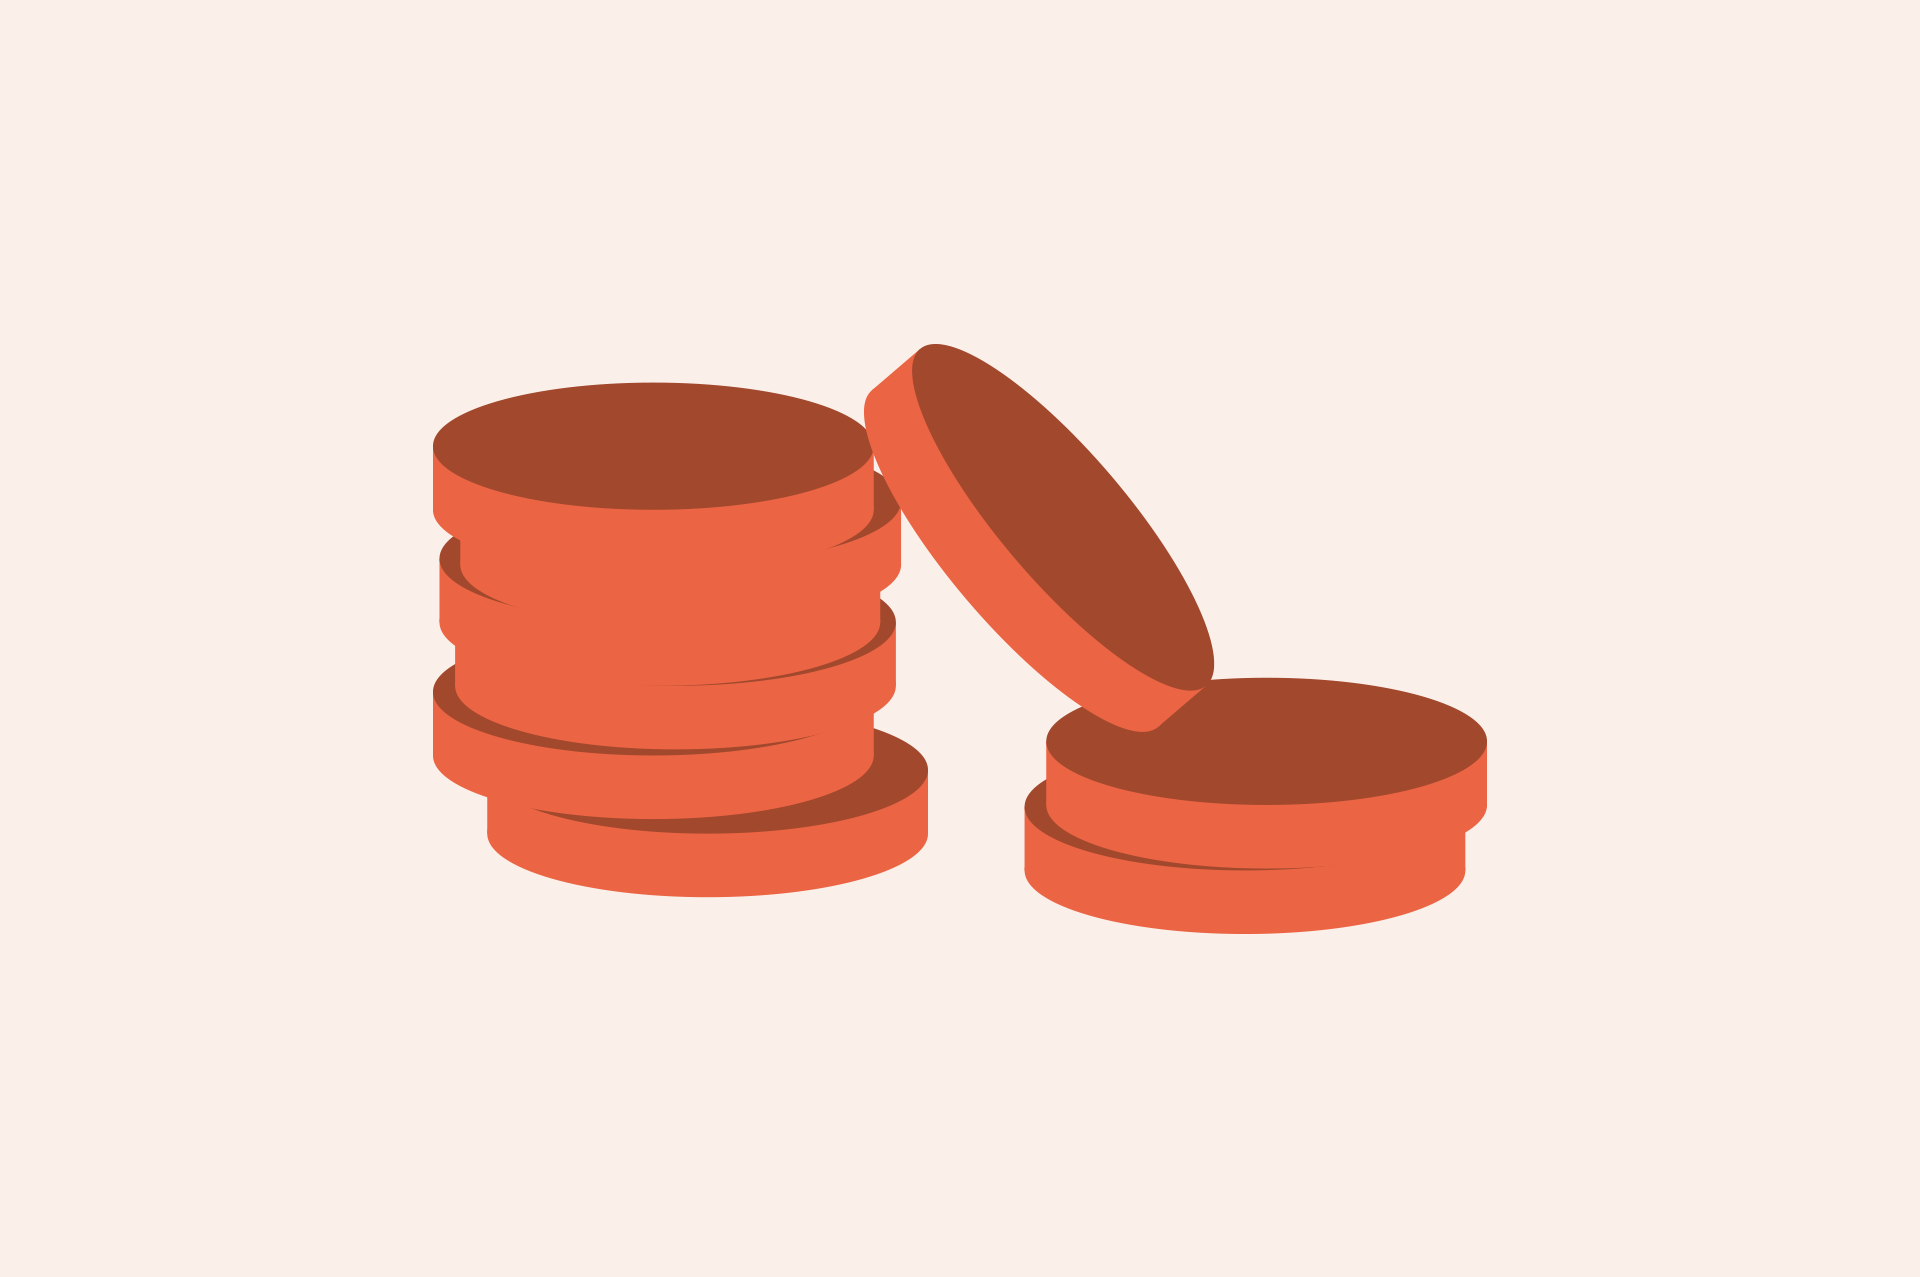 An illustration of a pile of coins